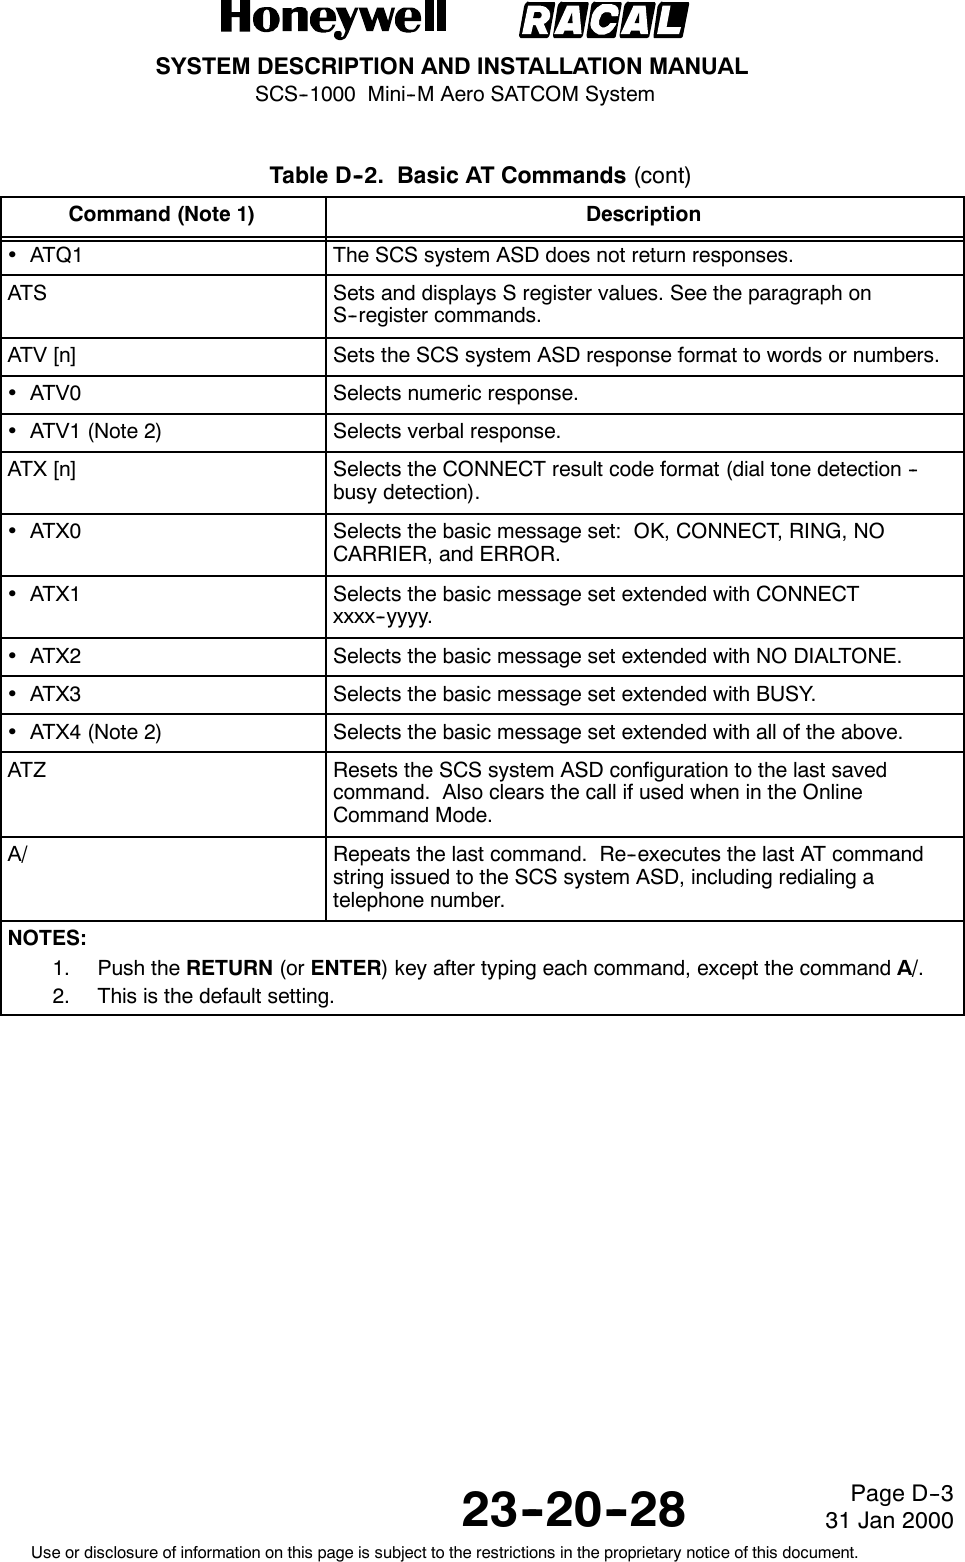 SYSTEM DESCRIPTION AND INSTALLATION MANUALSCS--1000 Mini--M Aero SATCOM System23--20--28Use or disclosure of information on this page is subject to the restrictions in the proprietary notice of this document.Page D--331 Jan 2000Table D--2. Basic AT Commands (cont)Command (Note 1) DescriptionATQ1 The SCS system ASD does not return responses.ATS Sets and displays S register values. See the paragraph onS--register commands.ATV [n] Sets the SCS system ASD response format to words or numbers.ATV0 Selects numeric response.ATV1 (Note 2) Selects verbal response.ATX [n] Selects the CONNECT result code format (dial tone detection --busy detection).ATX0 Selects the basic message set: OK, CONNECT, RING, NOCARRIER, and ERROR.ATX1 Selects the basic message set extended with CONNECTxxxx--yyyy.ATX2 Selects the basic message set extended with NO DIALTONE.ATX3 Selects the basic message set extended with BUSY.ATX4 (Note 2) Selects the basic message set extended with all of the above.ATZ Resets the SCS system ASD configuration to the last savedcommand. Also clears the call if used when in the OnlineCommand Mode.A/ Repeats the last command. Re--executes the last AT commandstring issued to the SCS system ASD, including redialing atelephone number.NOTES:1. Push the RETURN (or ENTER) key after typing each command, except the command A/.2. This is the default setting.